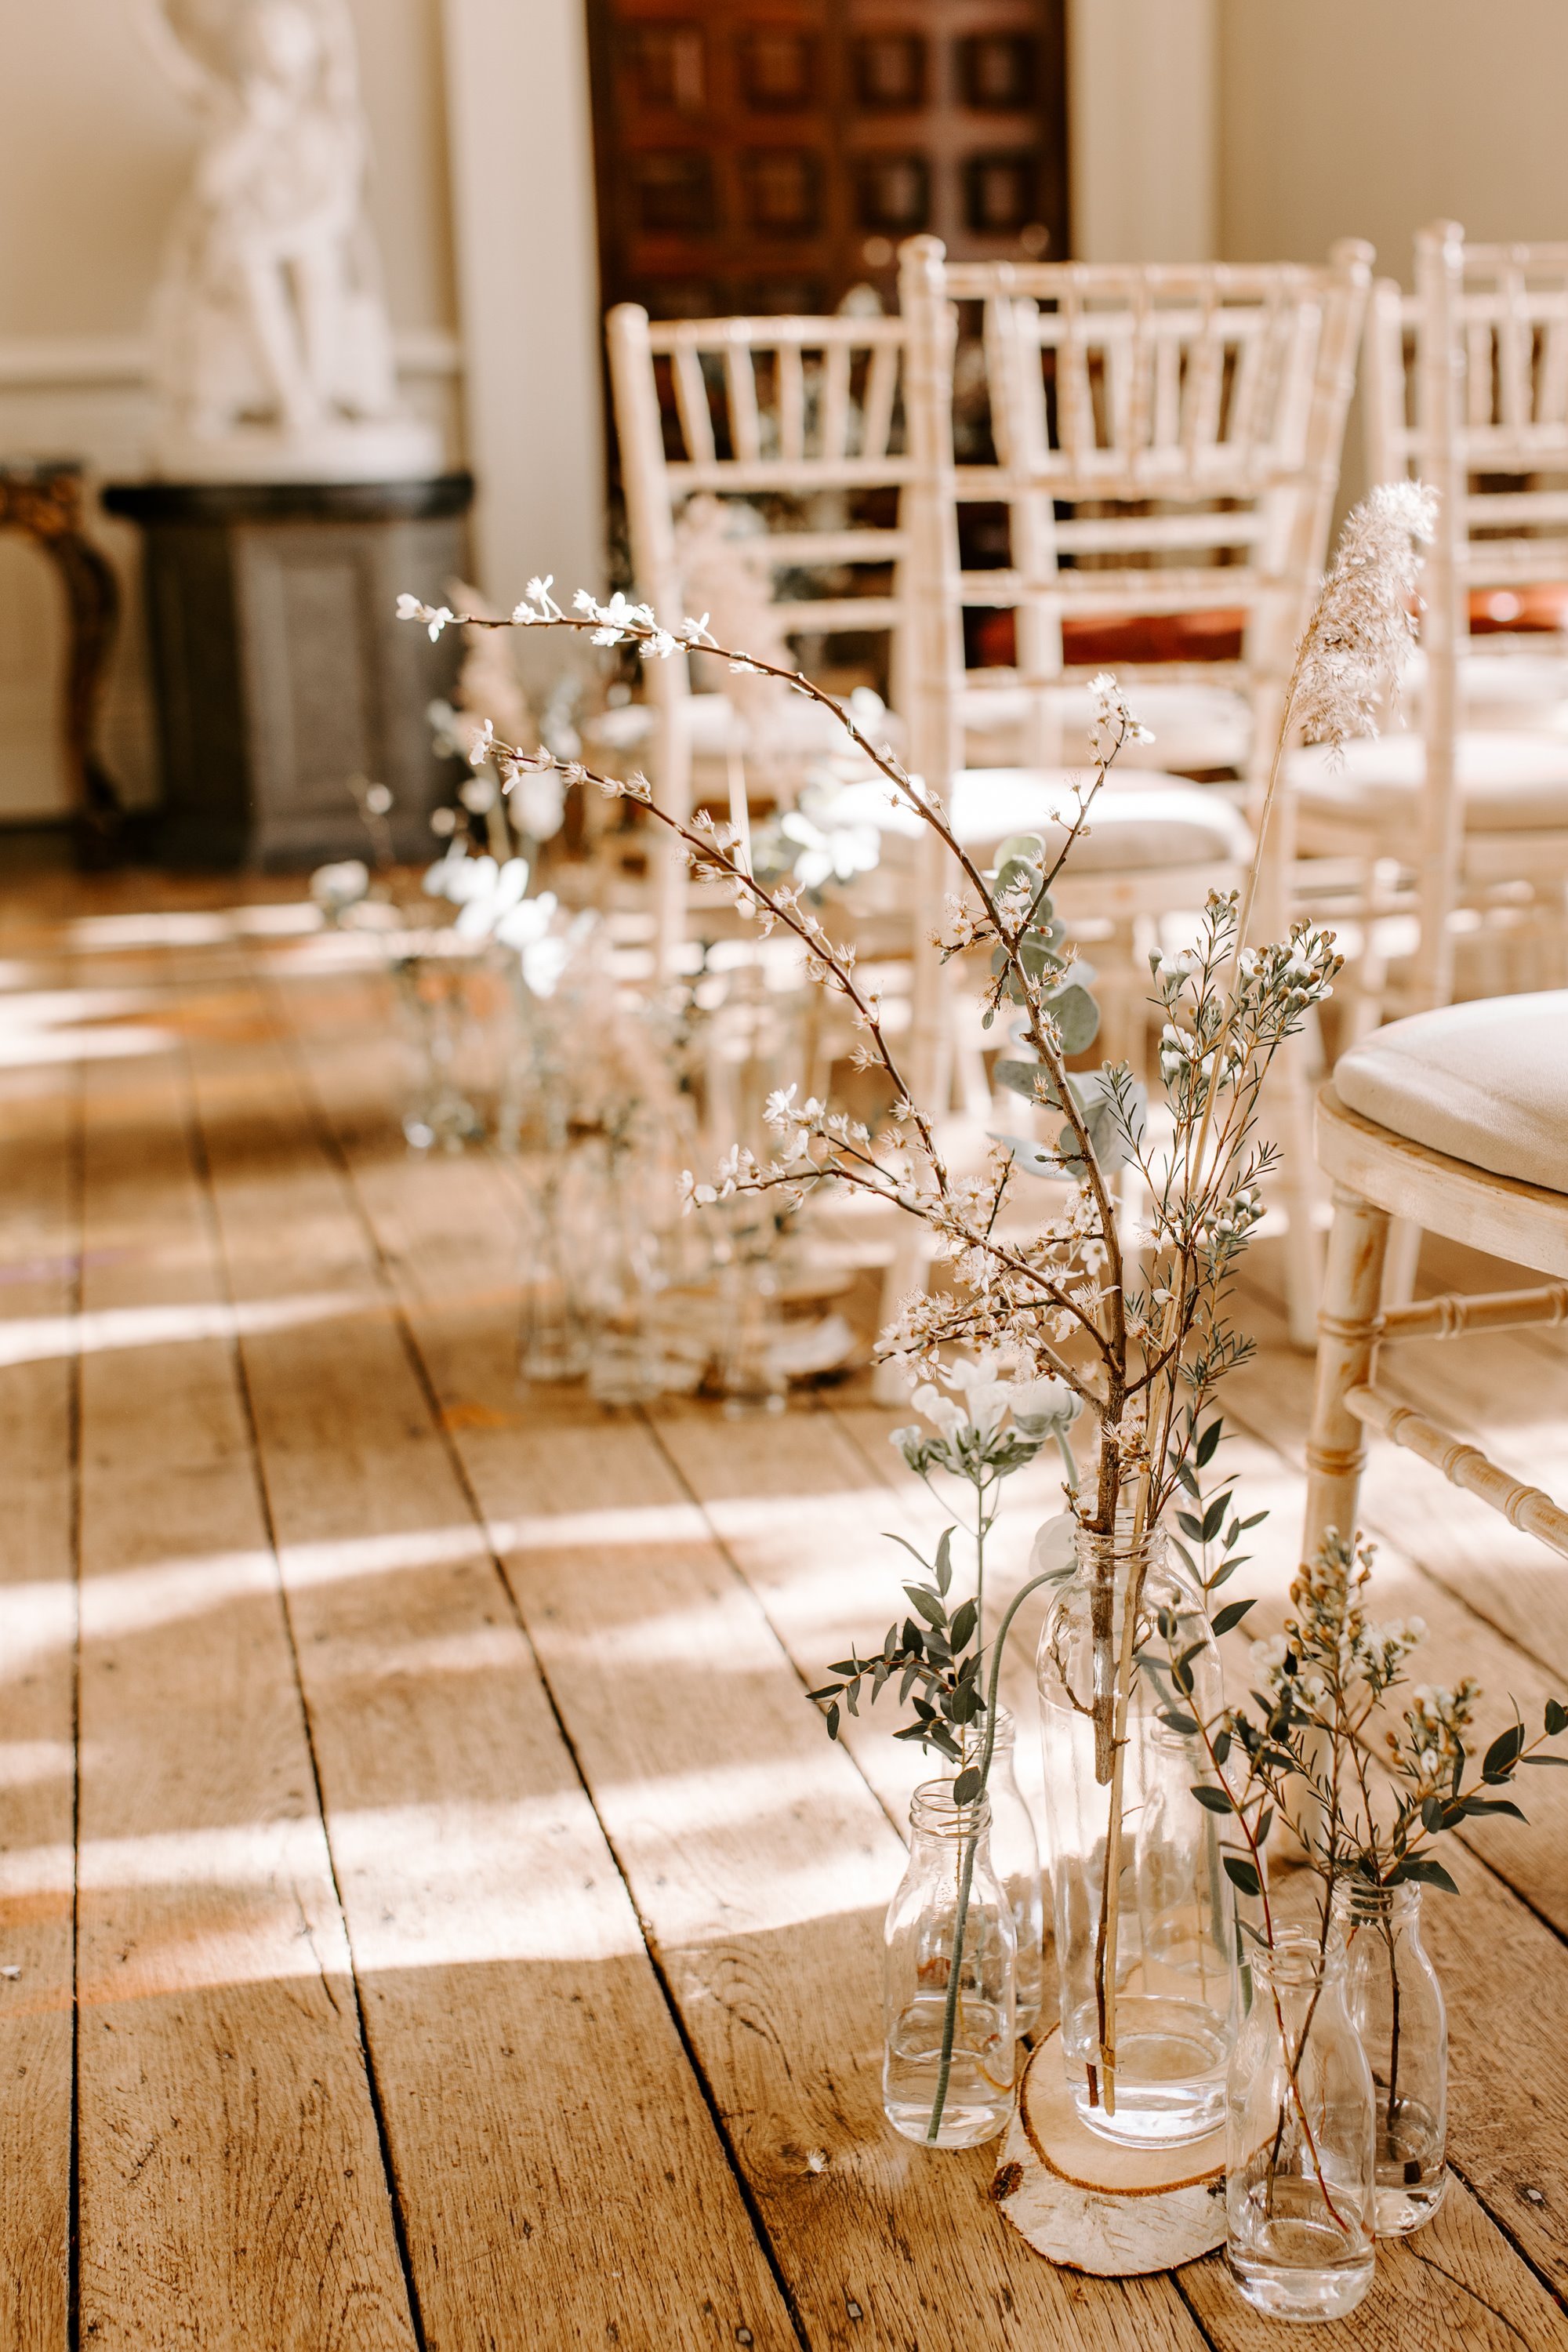 rustic wedding flowers on the floor of the aisle at a wedding ceremony